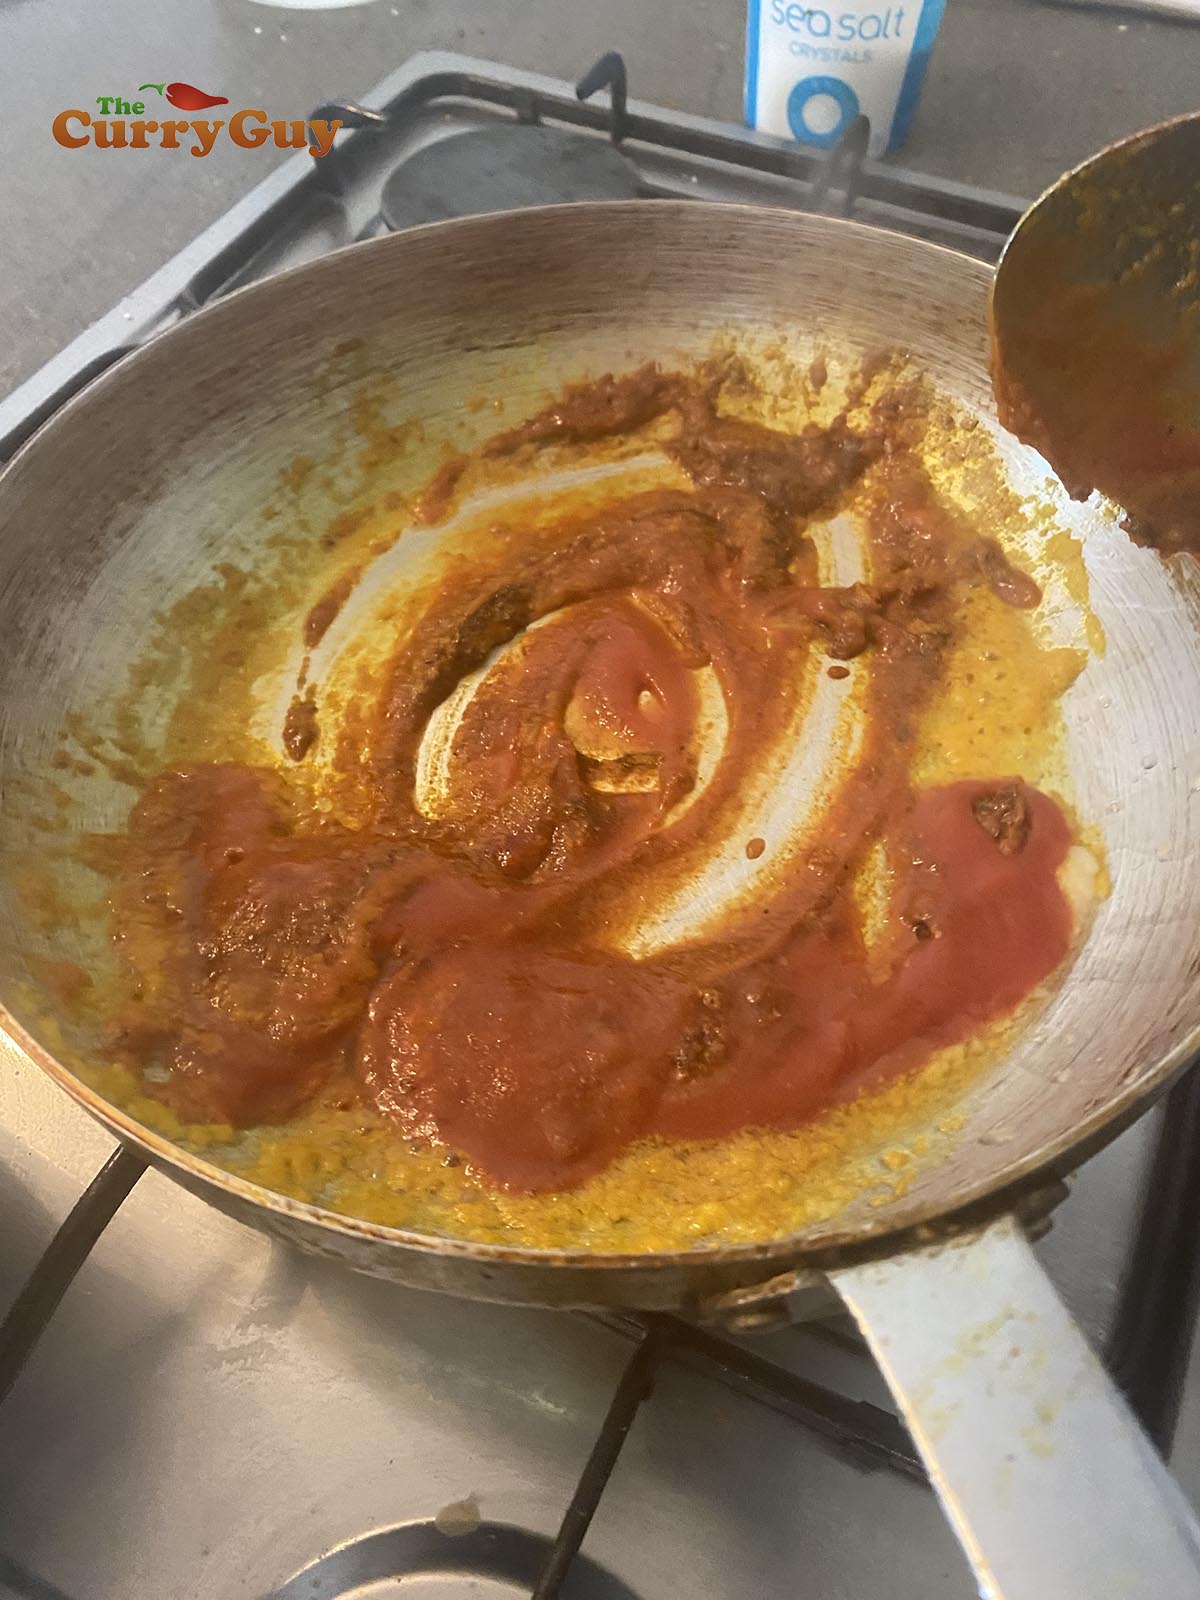 Adding spices and tomato puree to the pan